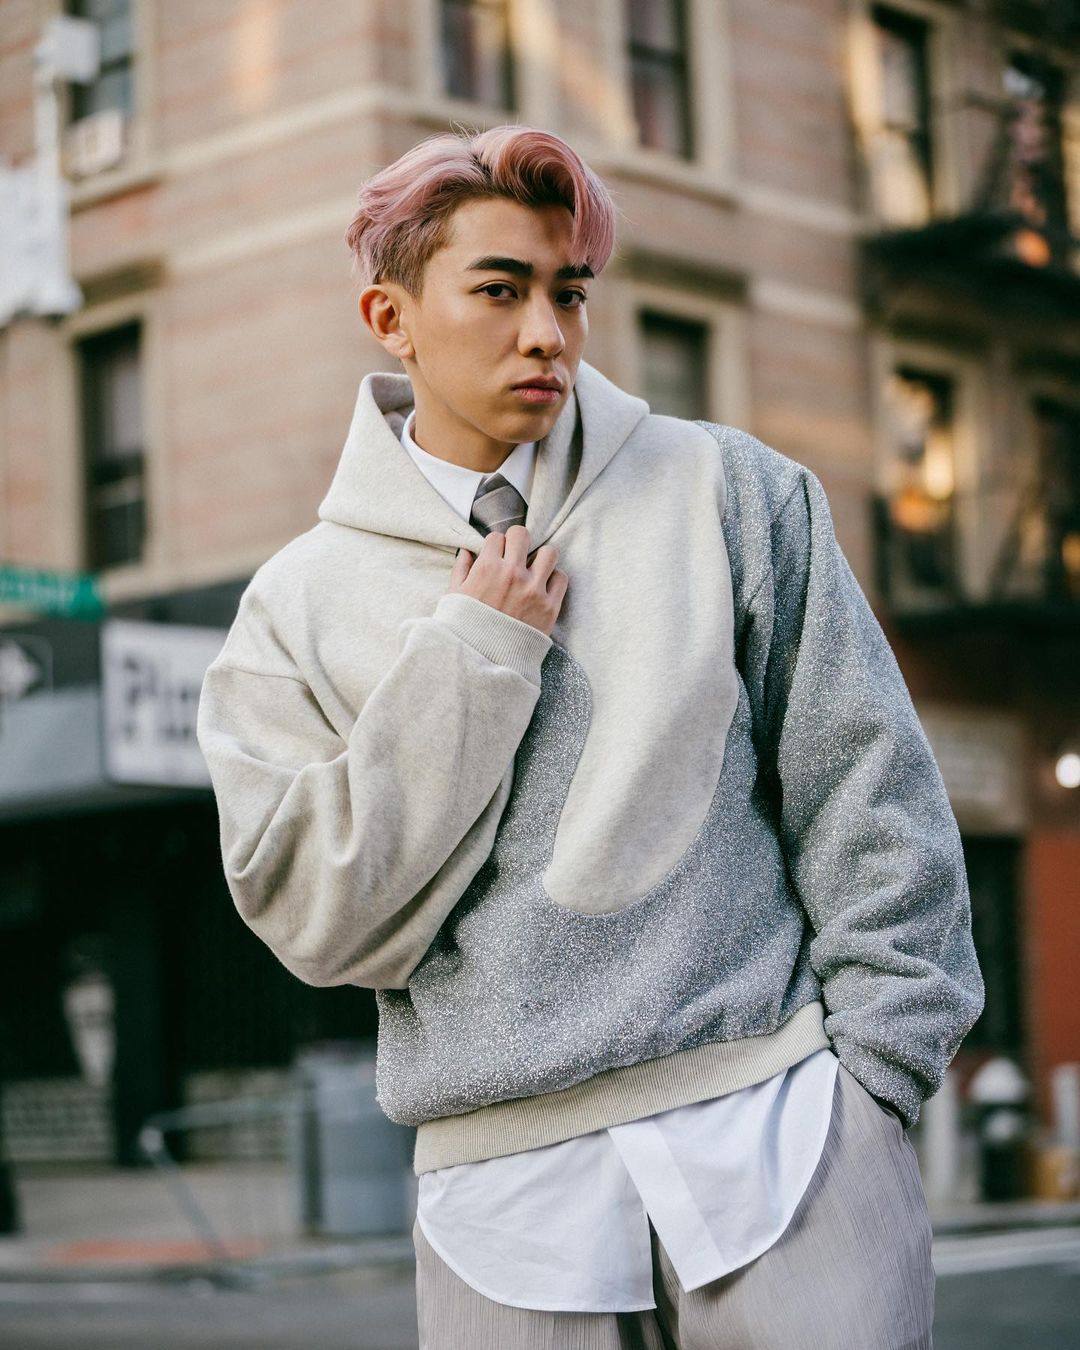 Hong Kong singer and rapper Tyson Yoshi wore this chic Dior outfit in New York City, US, in January. Photo: @tysonyoshi/Instagram